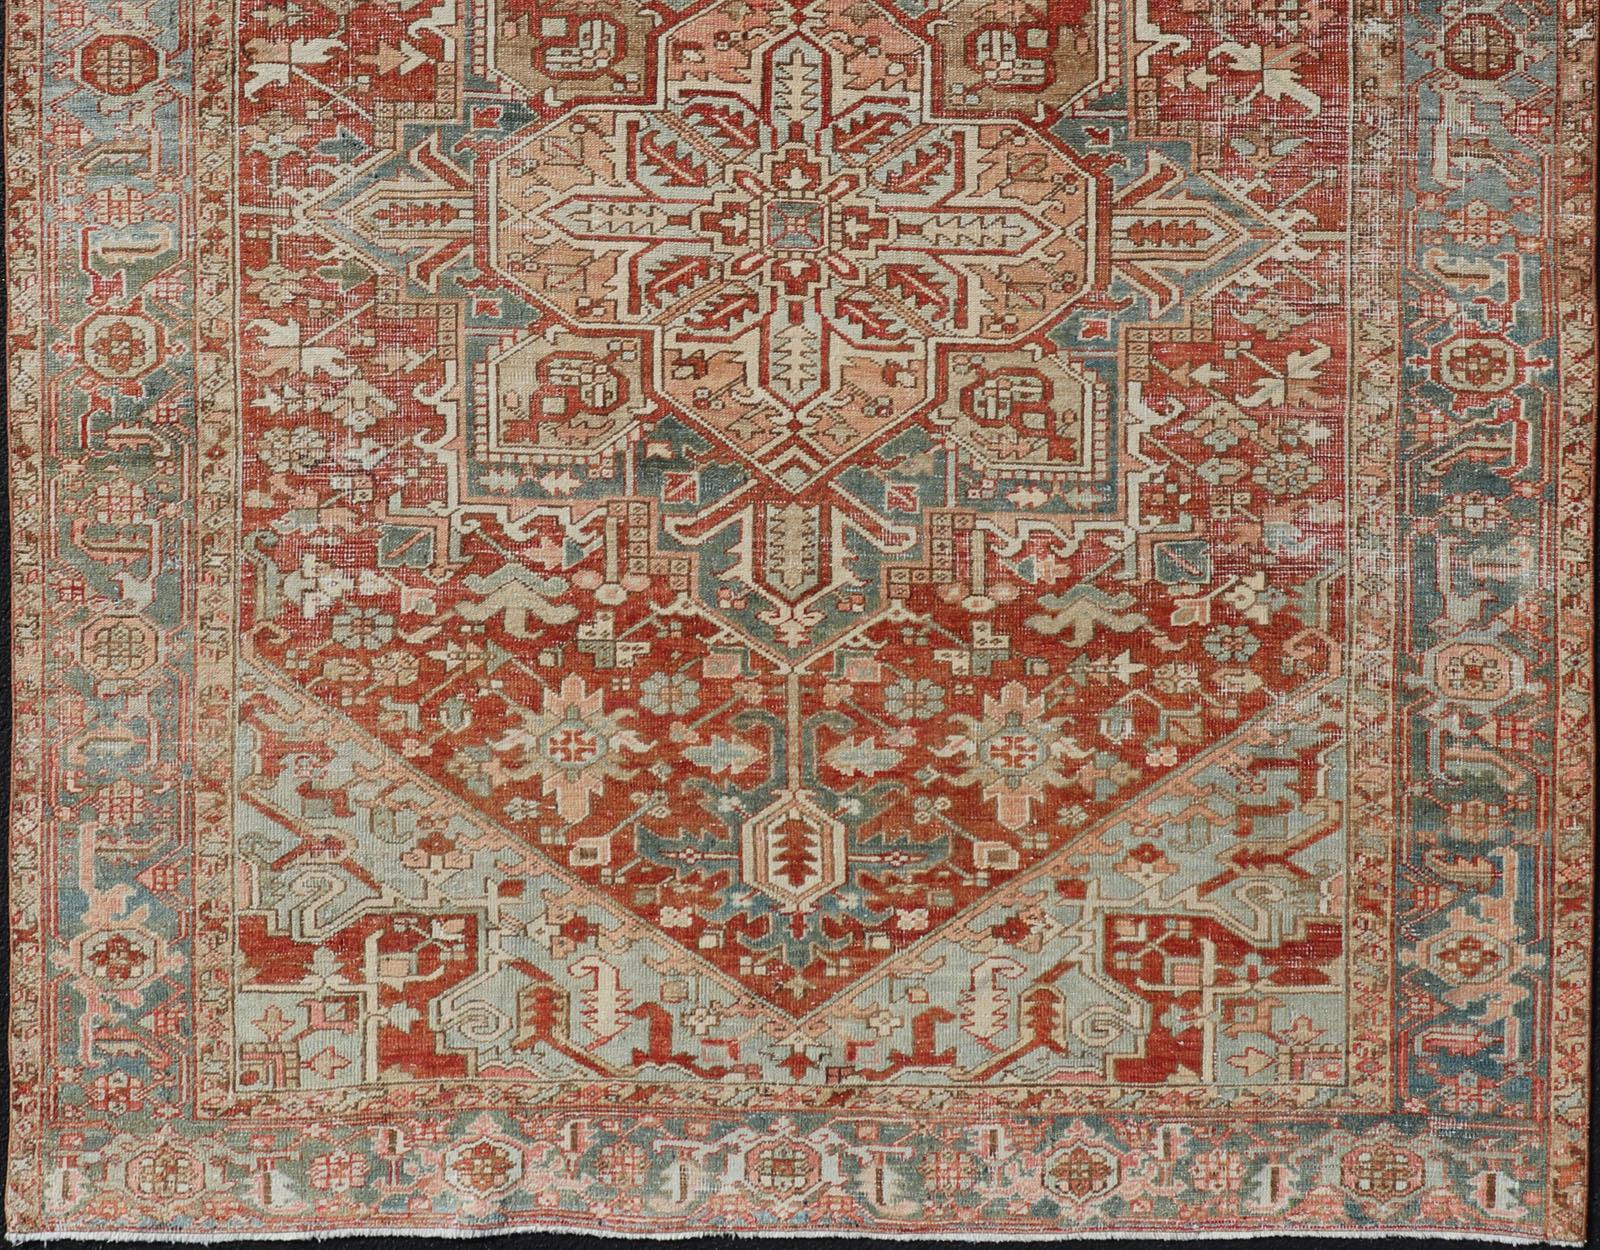 Antique Heriz Rug with All-Over Medallion Design in Red, Blue, Pink, Tan & Brown
Antique Heriz Rug, Keivan Woven Arts / rug EMB-9533-P13059, country of origin / type: Persian / Heriz, circa Early-20th Century.

Measures: 6'11 x 9'7.